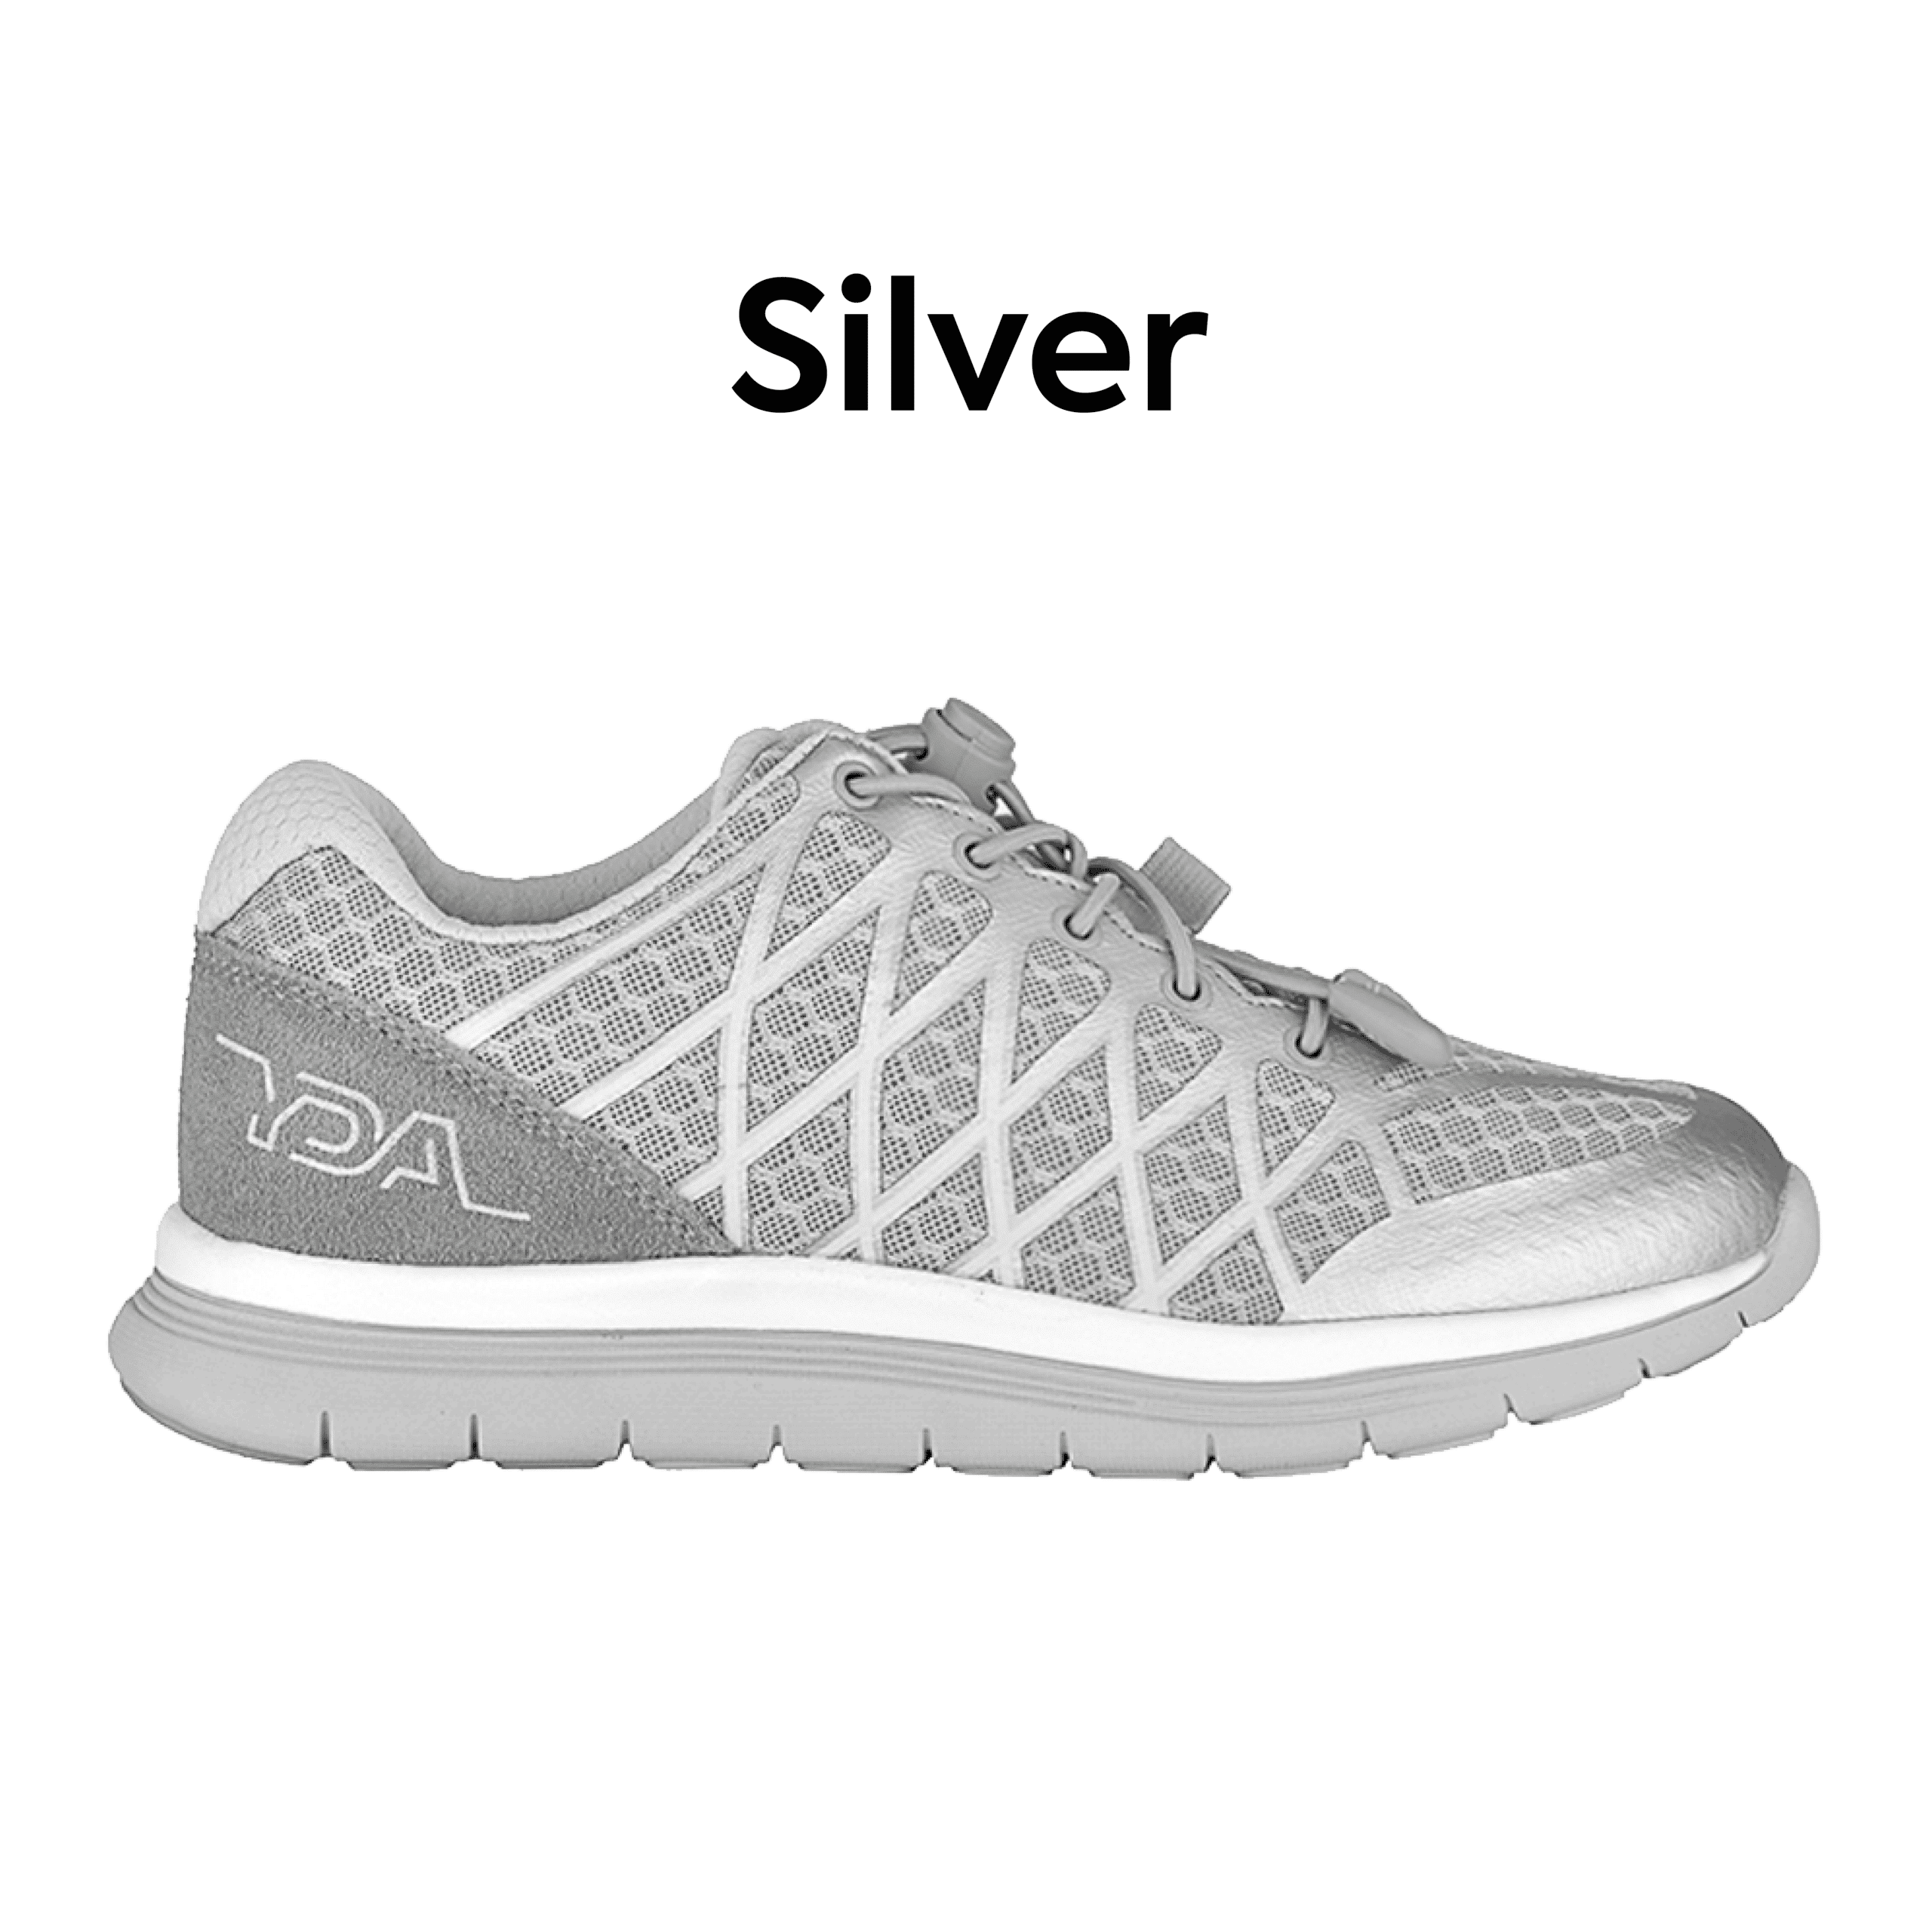 20220401_all YDA shoes_silver